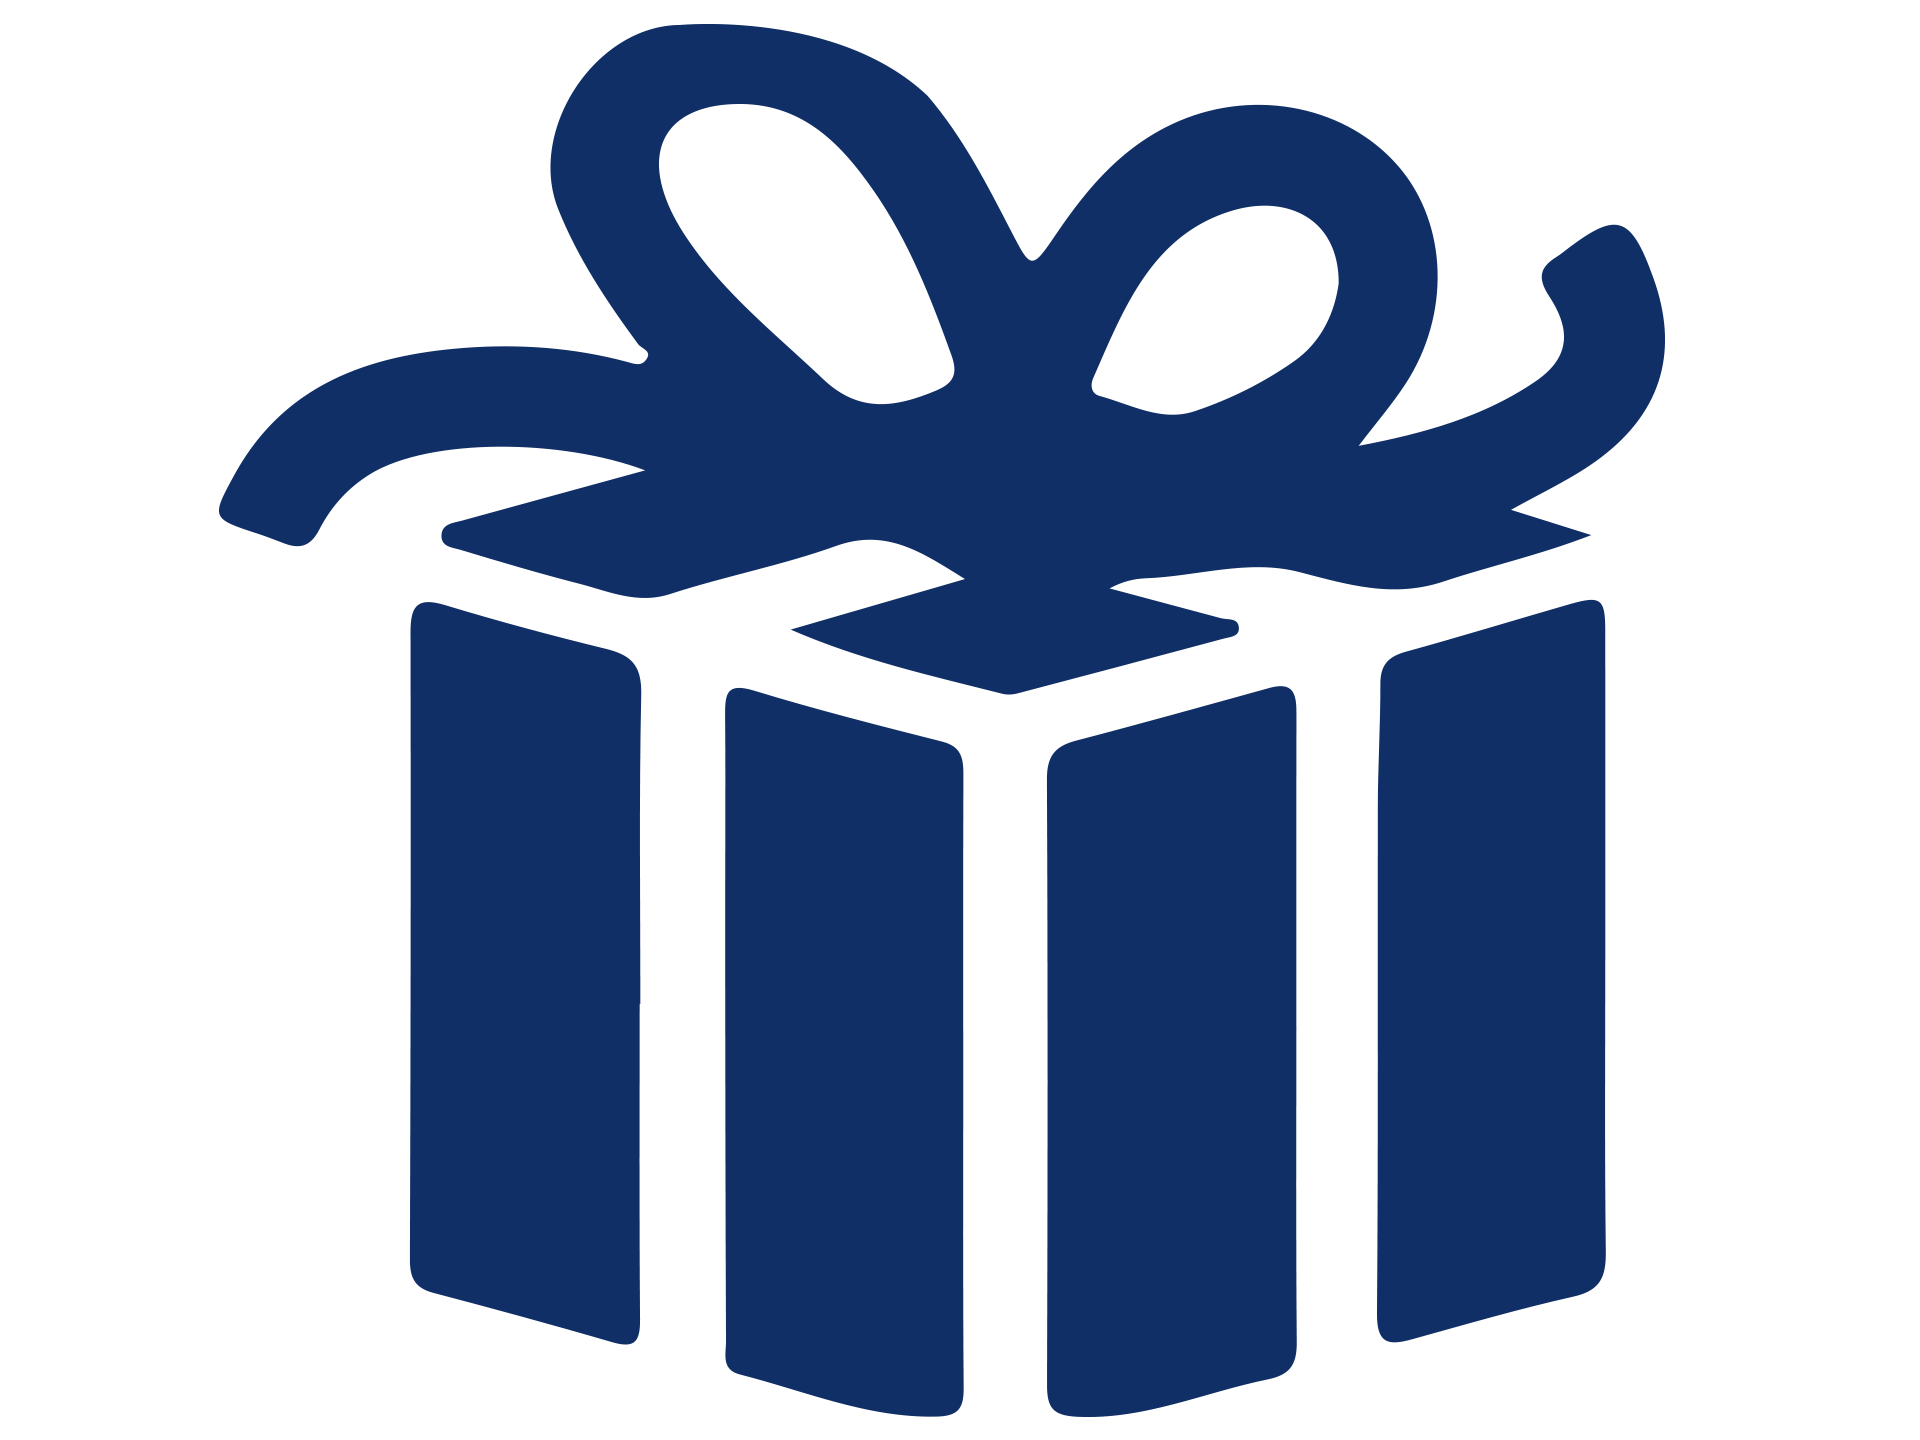 Graphic depiction of a gift box with bow in navy blue